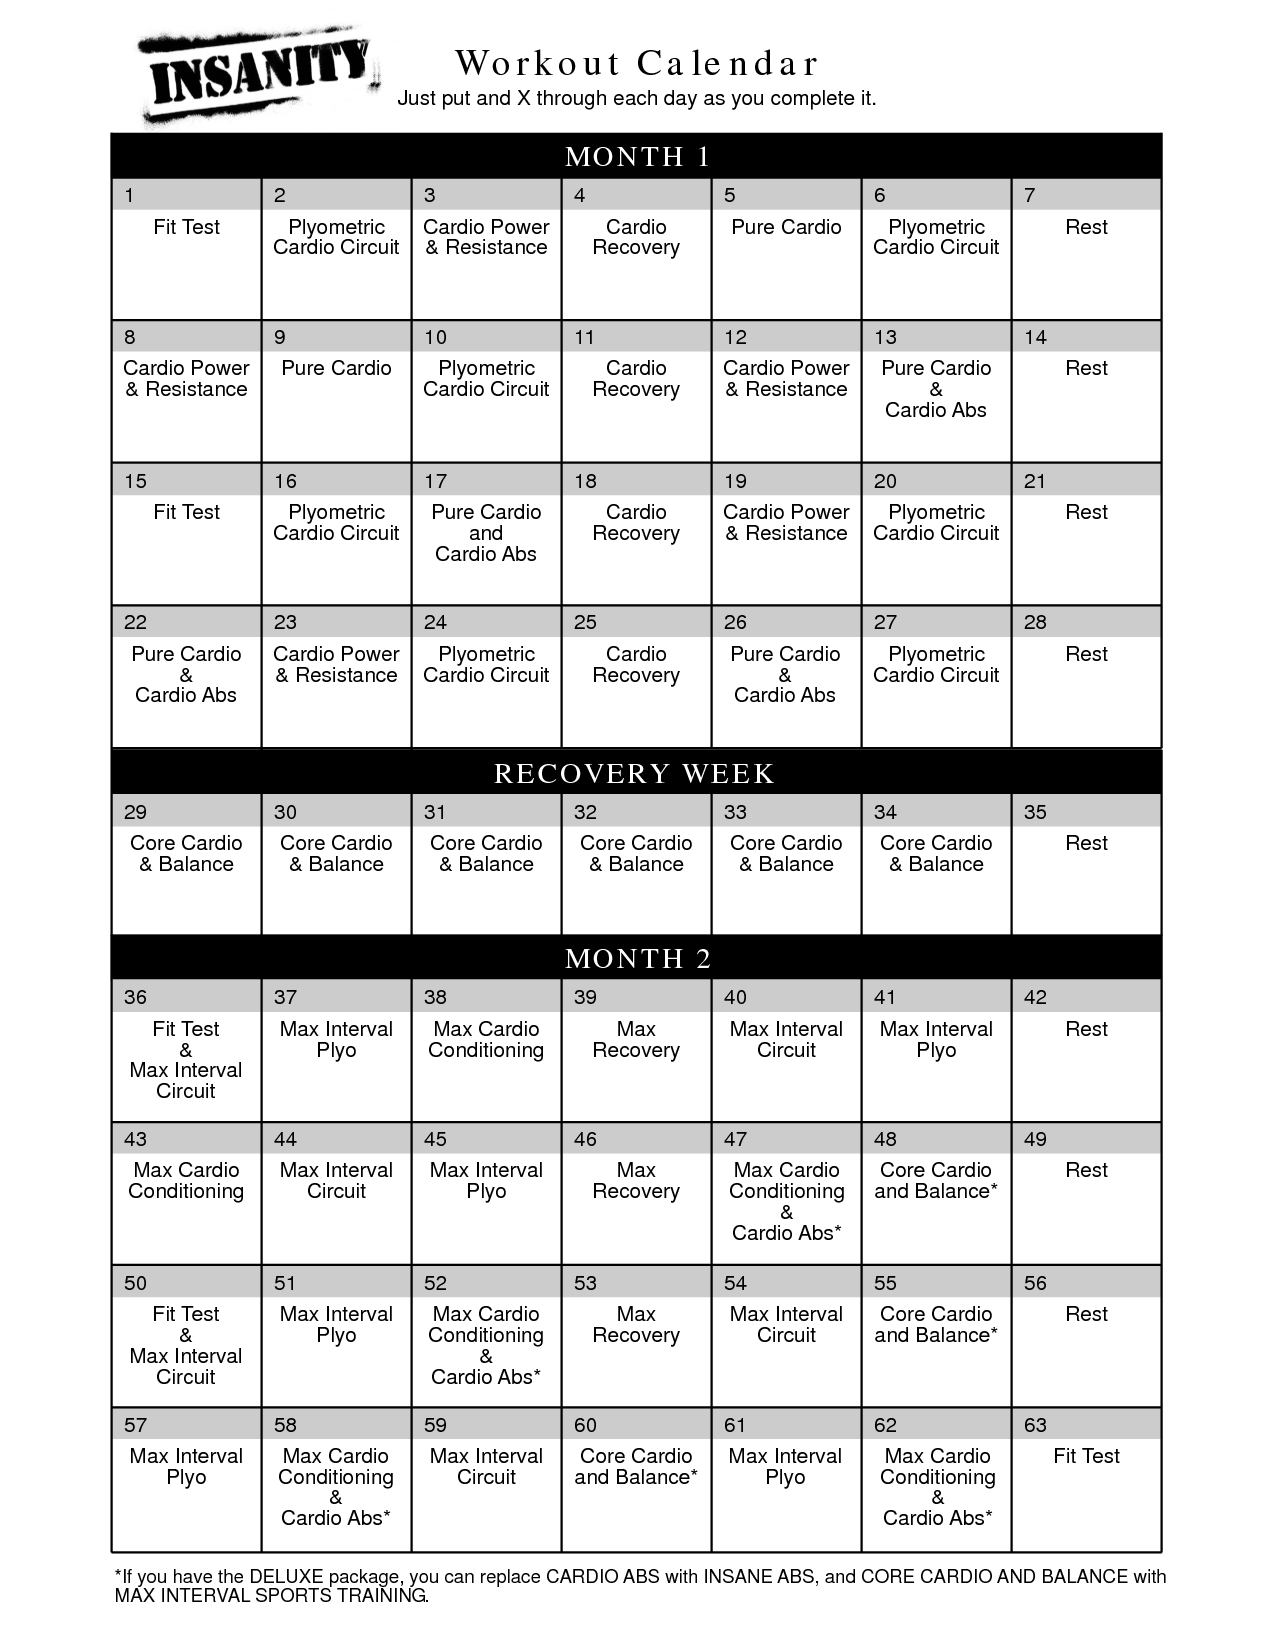 18 Minute Insanity workout utorrent at Gym